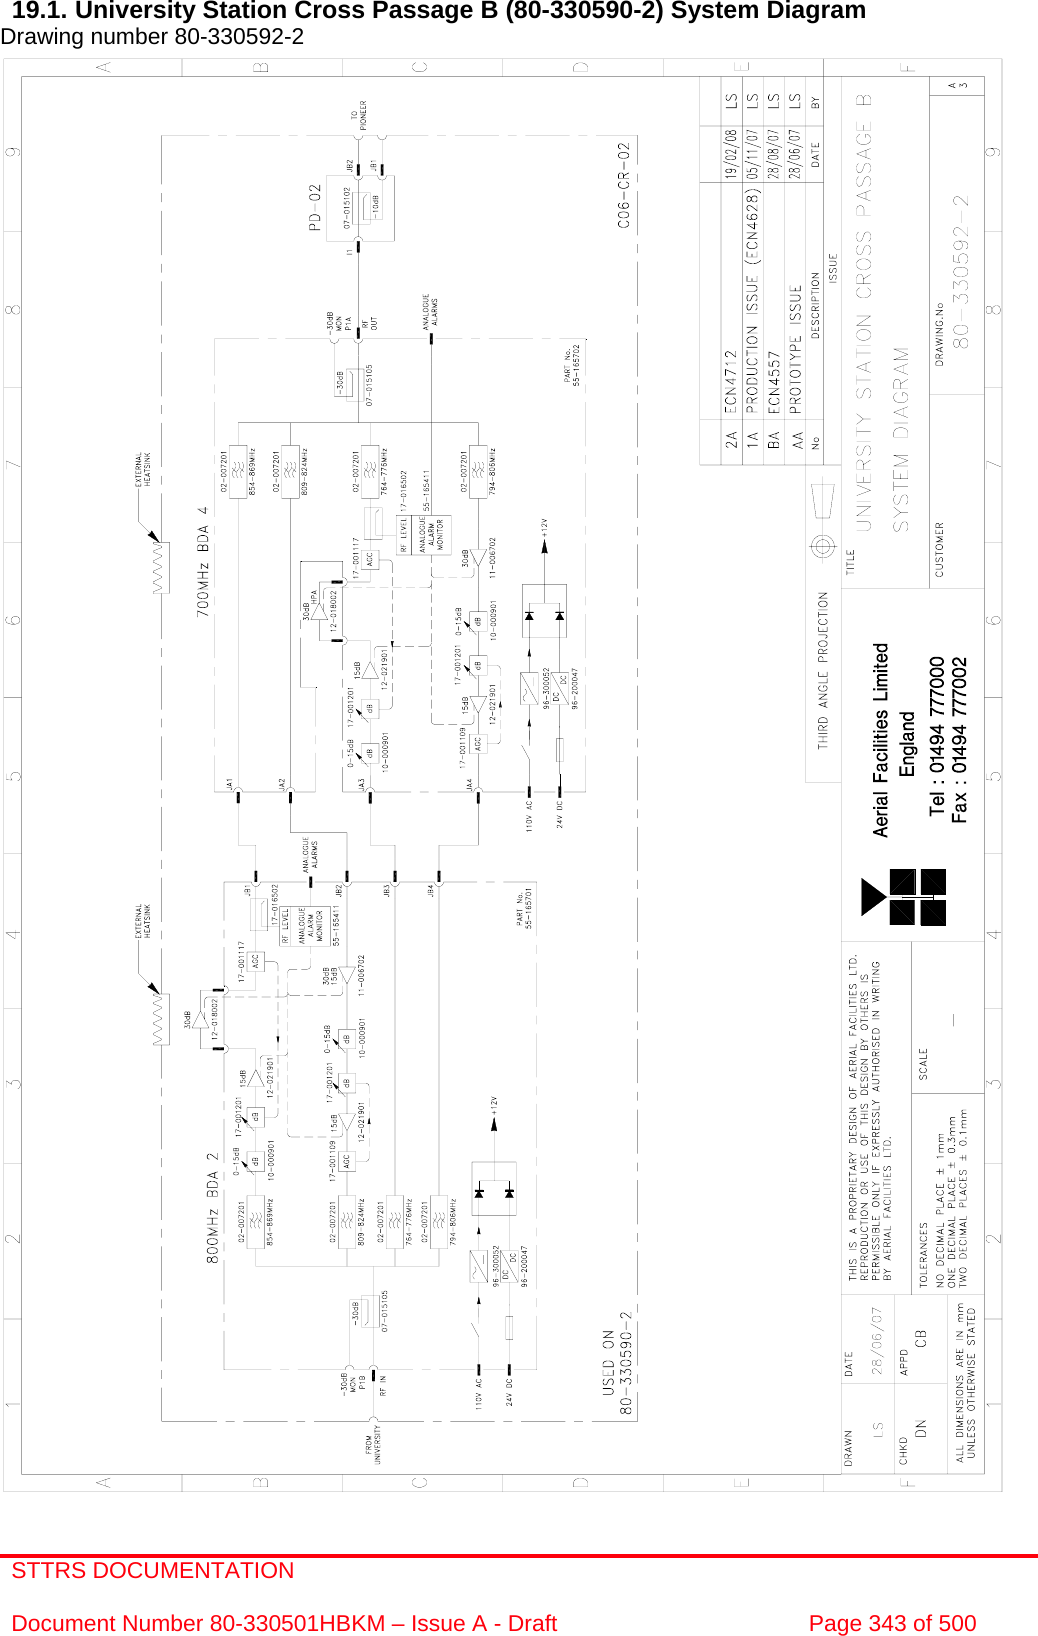 STTRS DOCUMENTATION  Document Number 80-330501HBKM – Issue A - Draft  Page 343 of 500   19.1. University Station Cross Passage B (80-330590-2) System Diagram Drawing number 80-330592-2                                                       